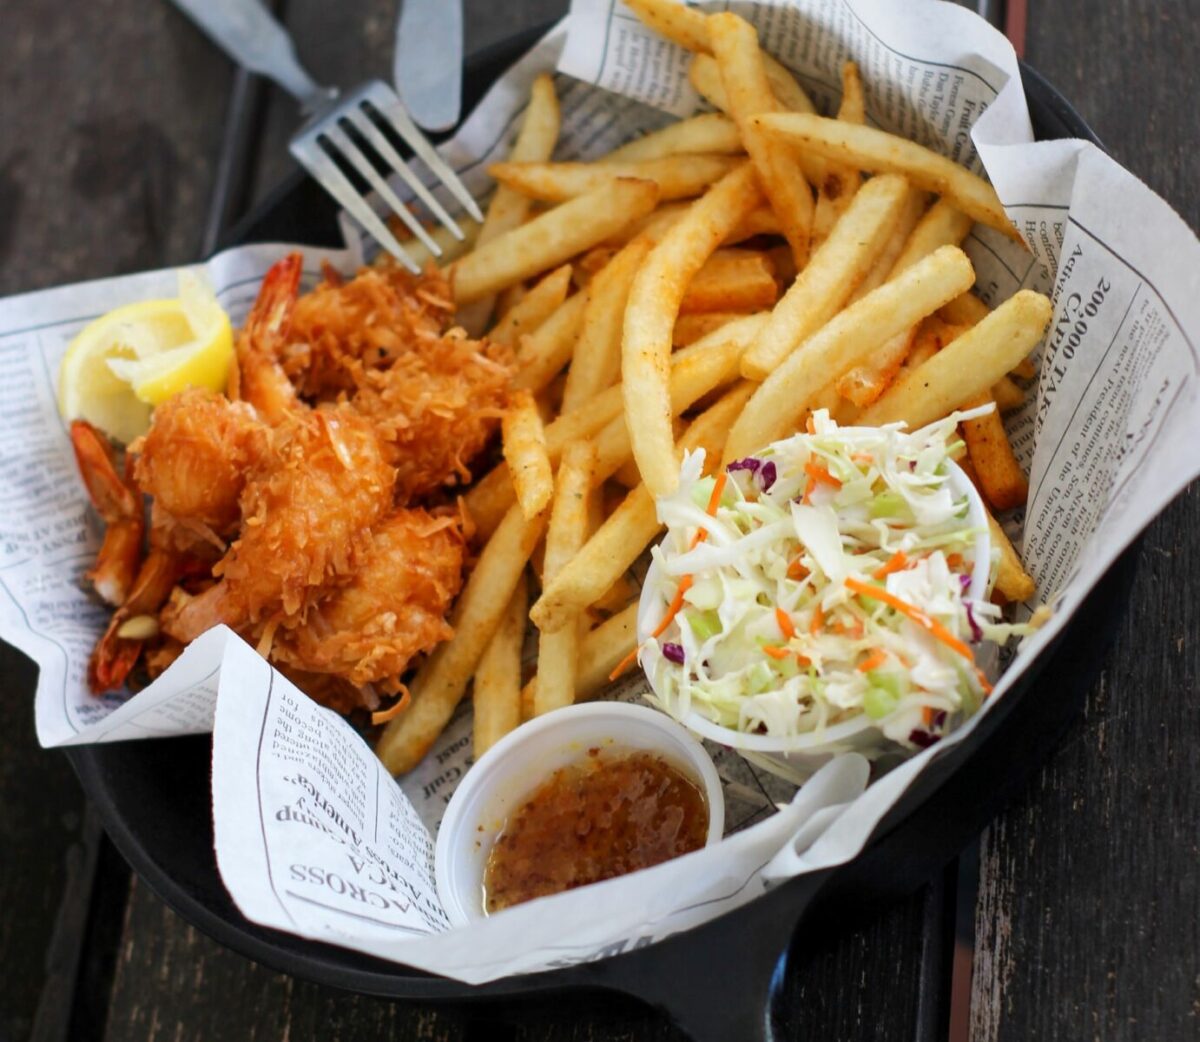 fried fish and french fries